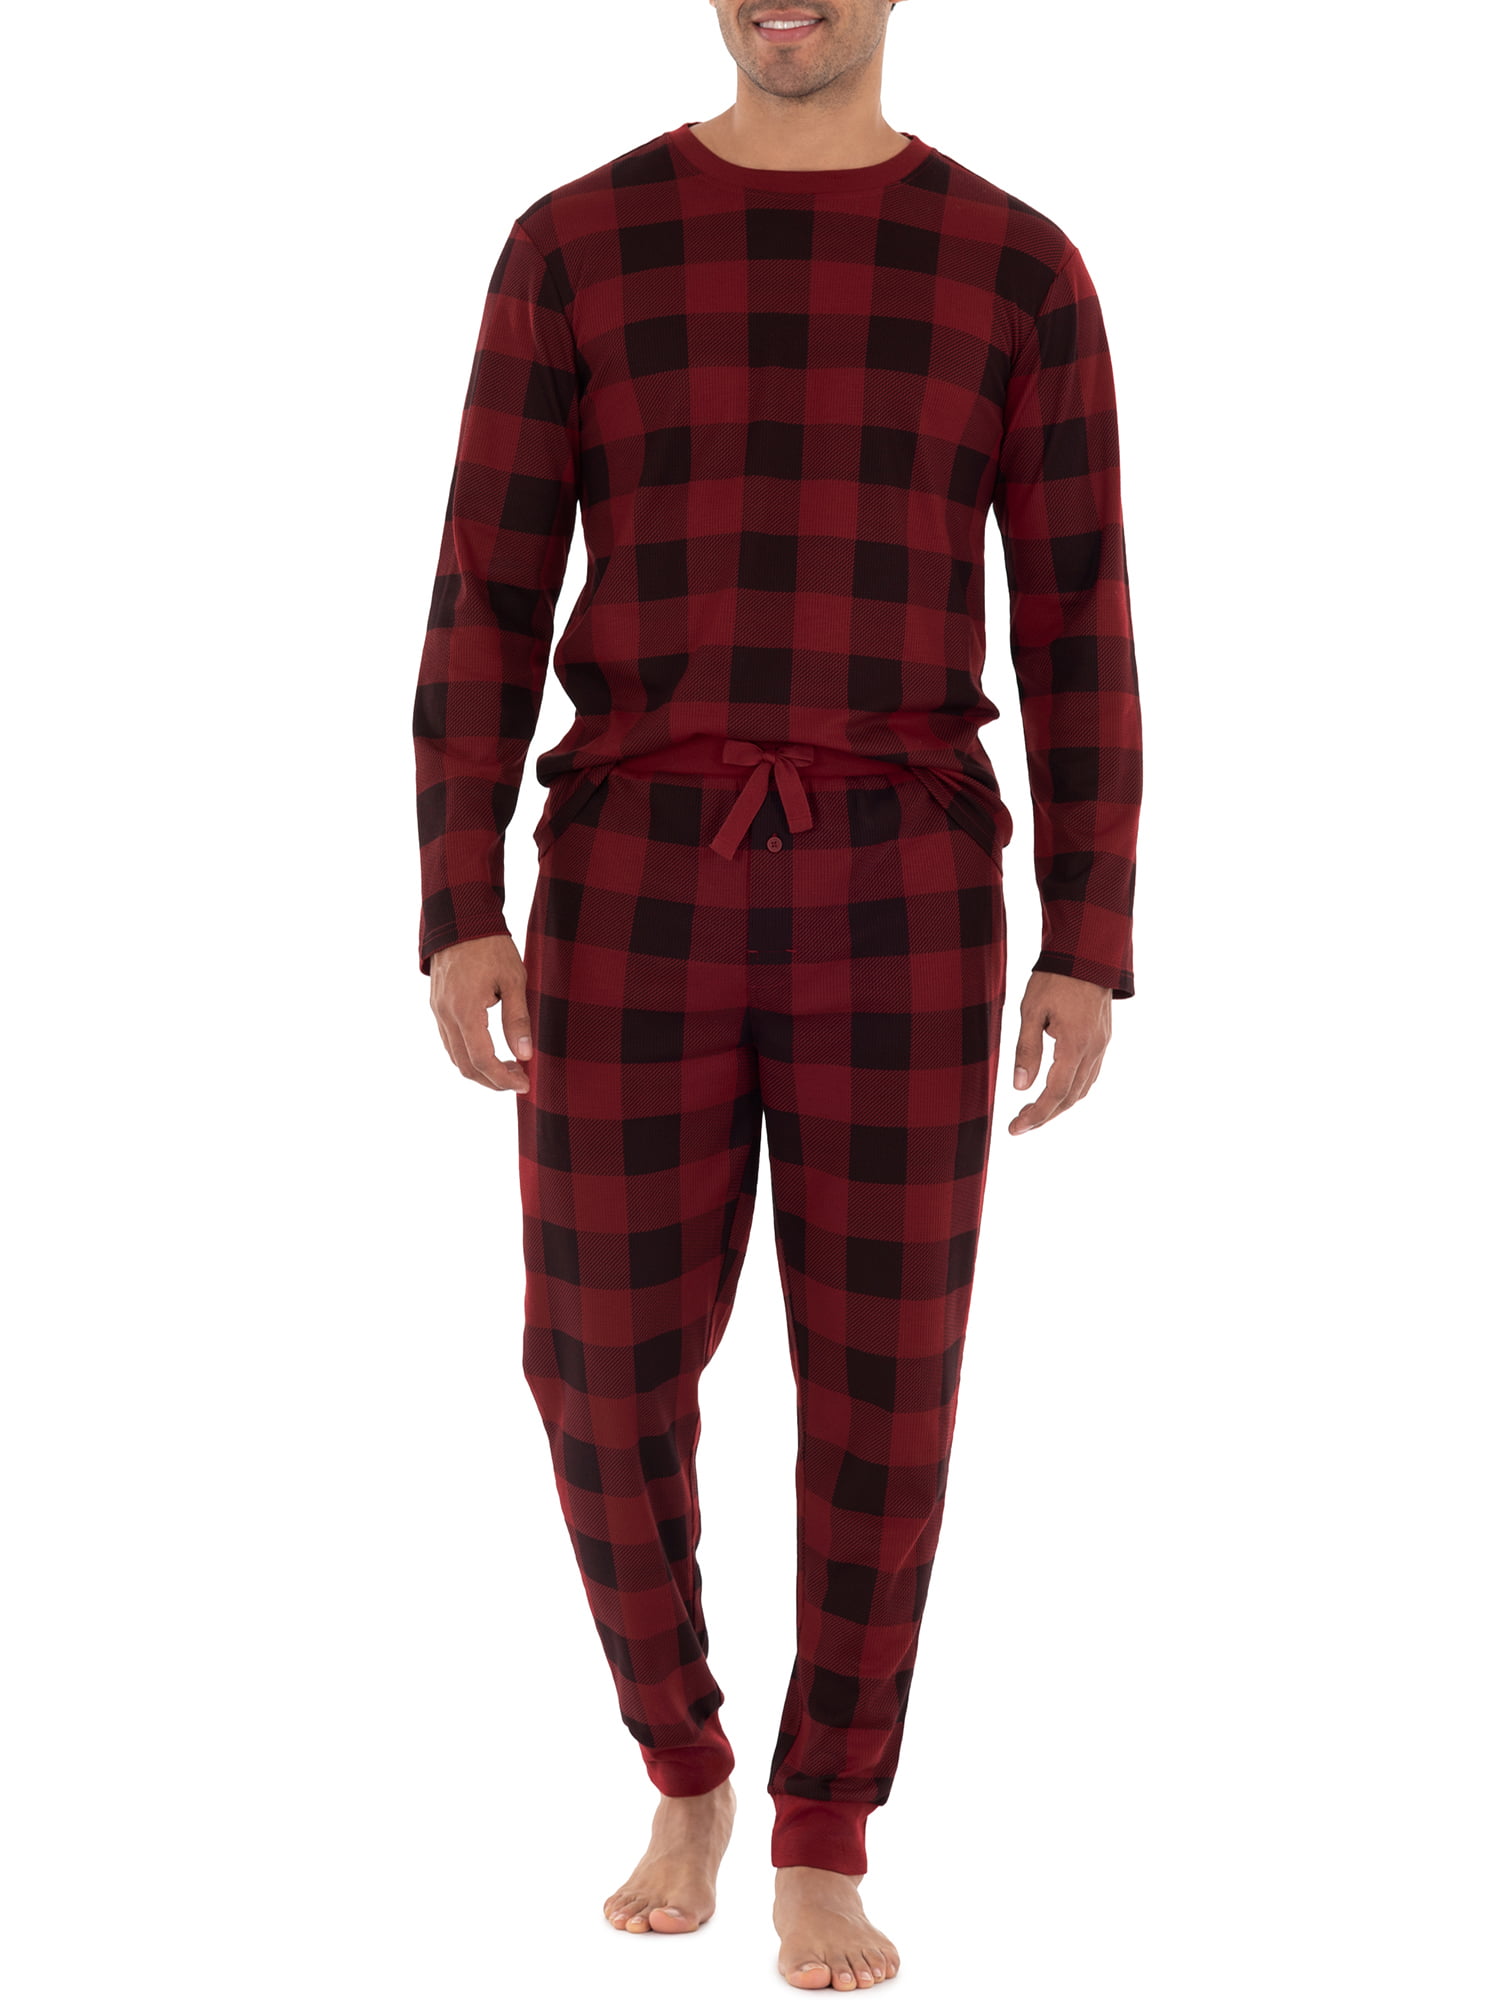 Men's Thermal Super Soft Checked Pyjamas Red or Blue Mens Pjs  M-2XL new 